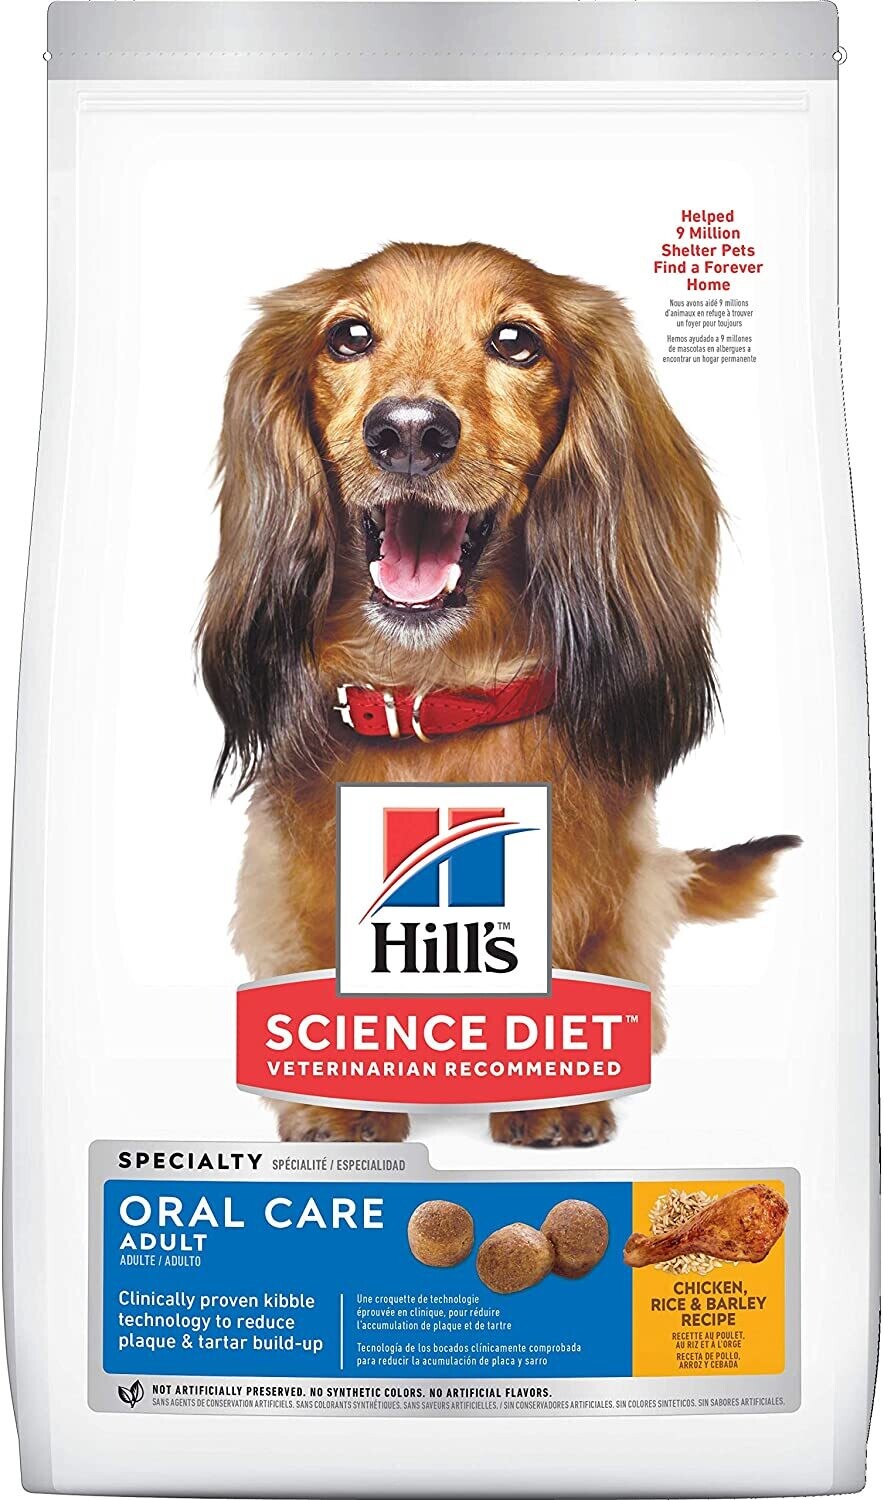 HILL'S SCIENCE DIET ADULT ORAL CARE 28.5LB